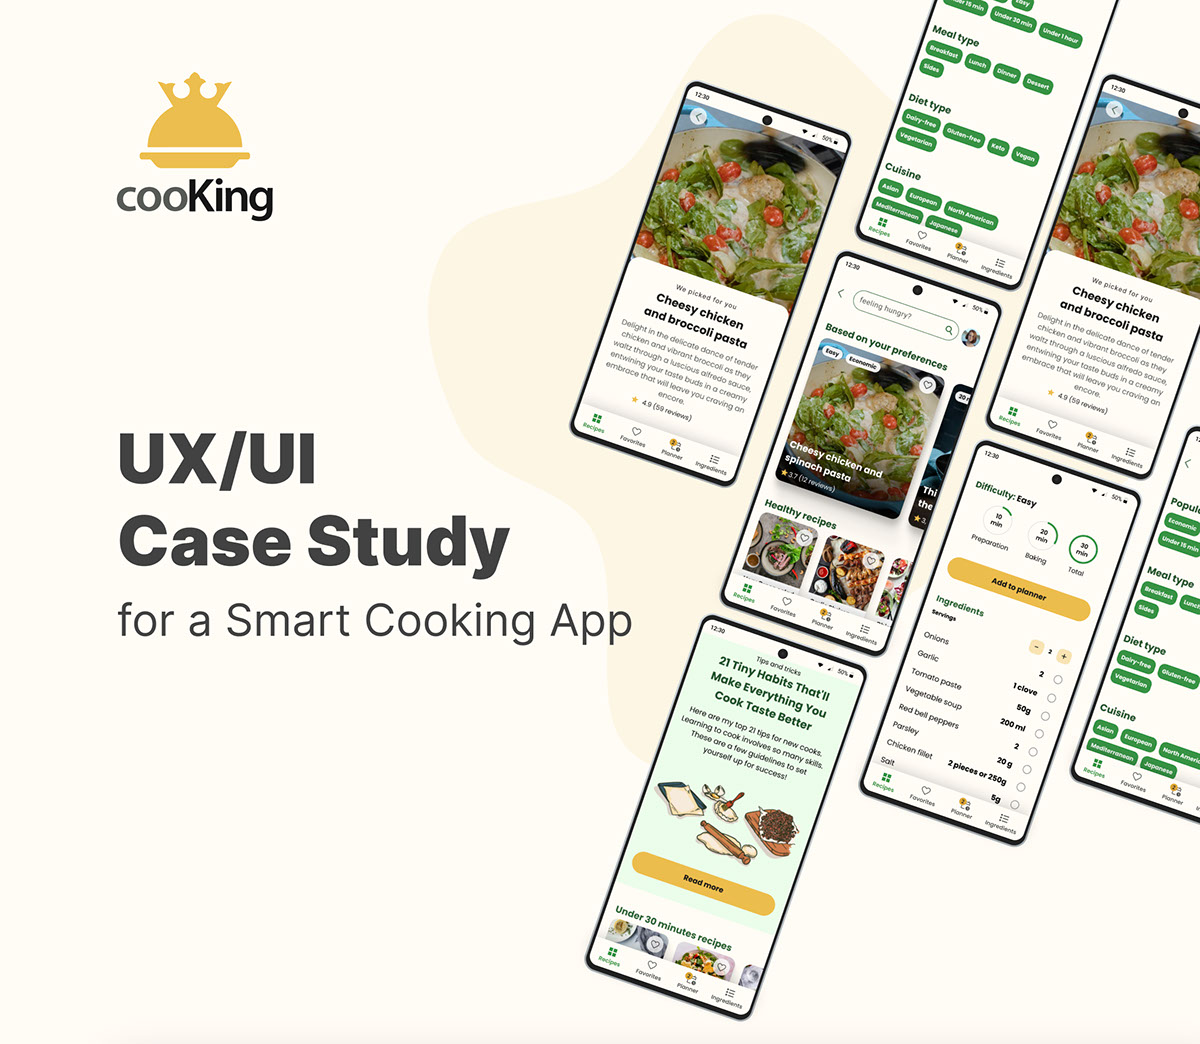 Mobile cooking app Case Study rendition image